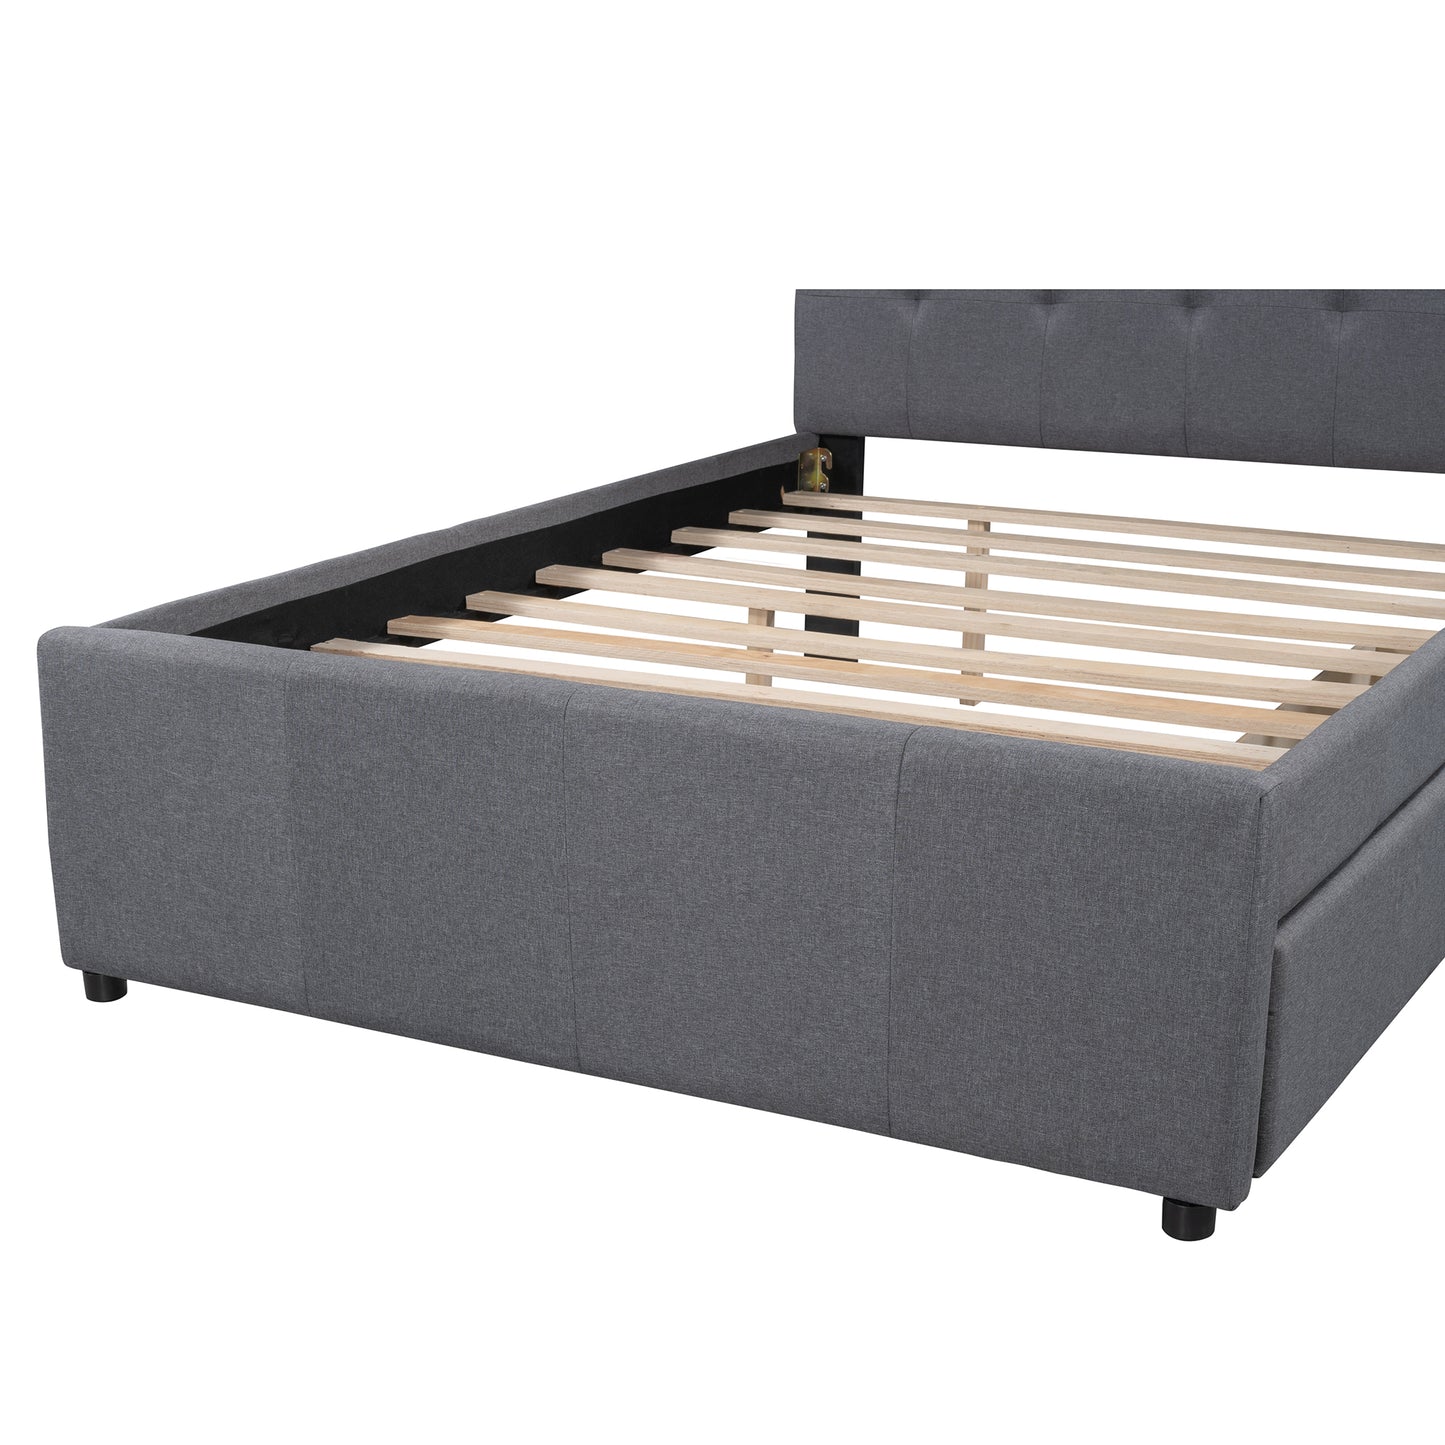 Linen Upholstered Platform Bed With Headboard and Two Drawers, Full